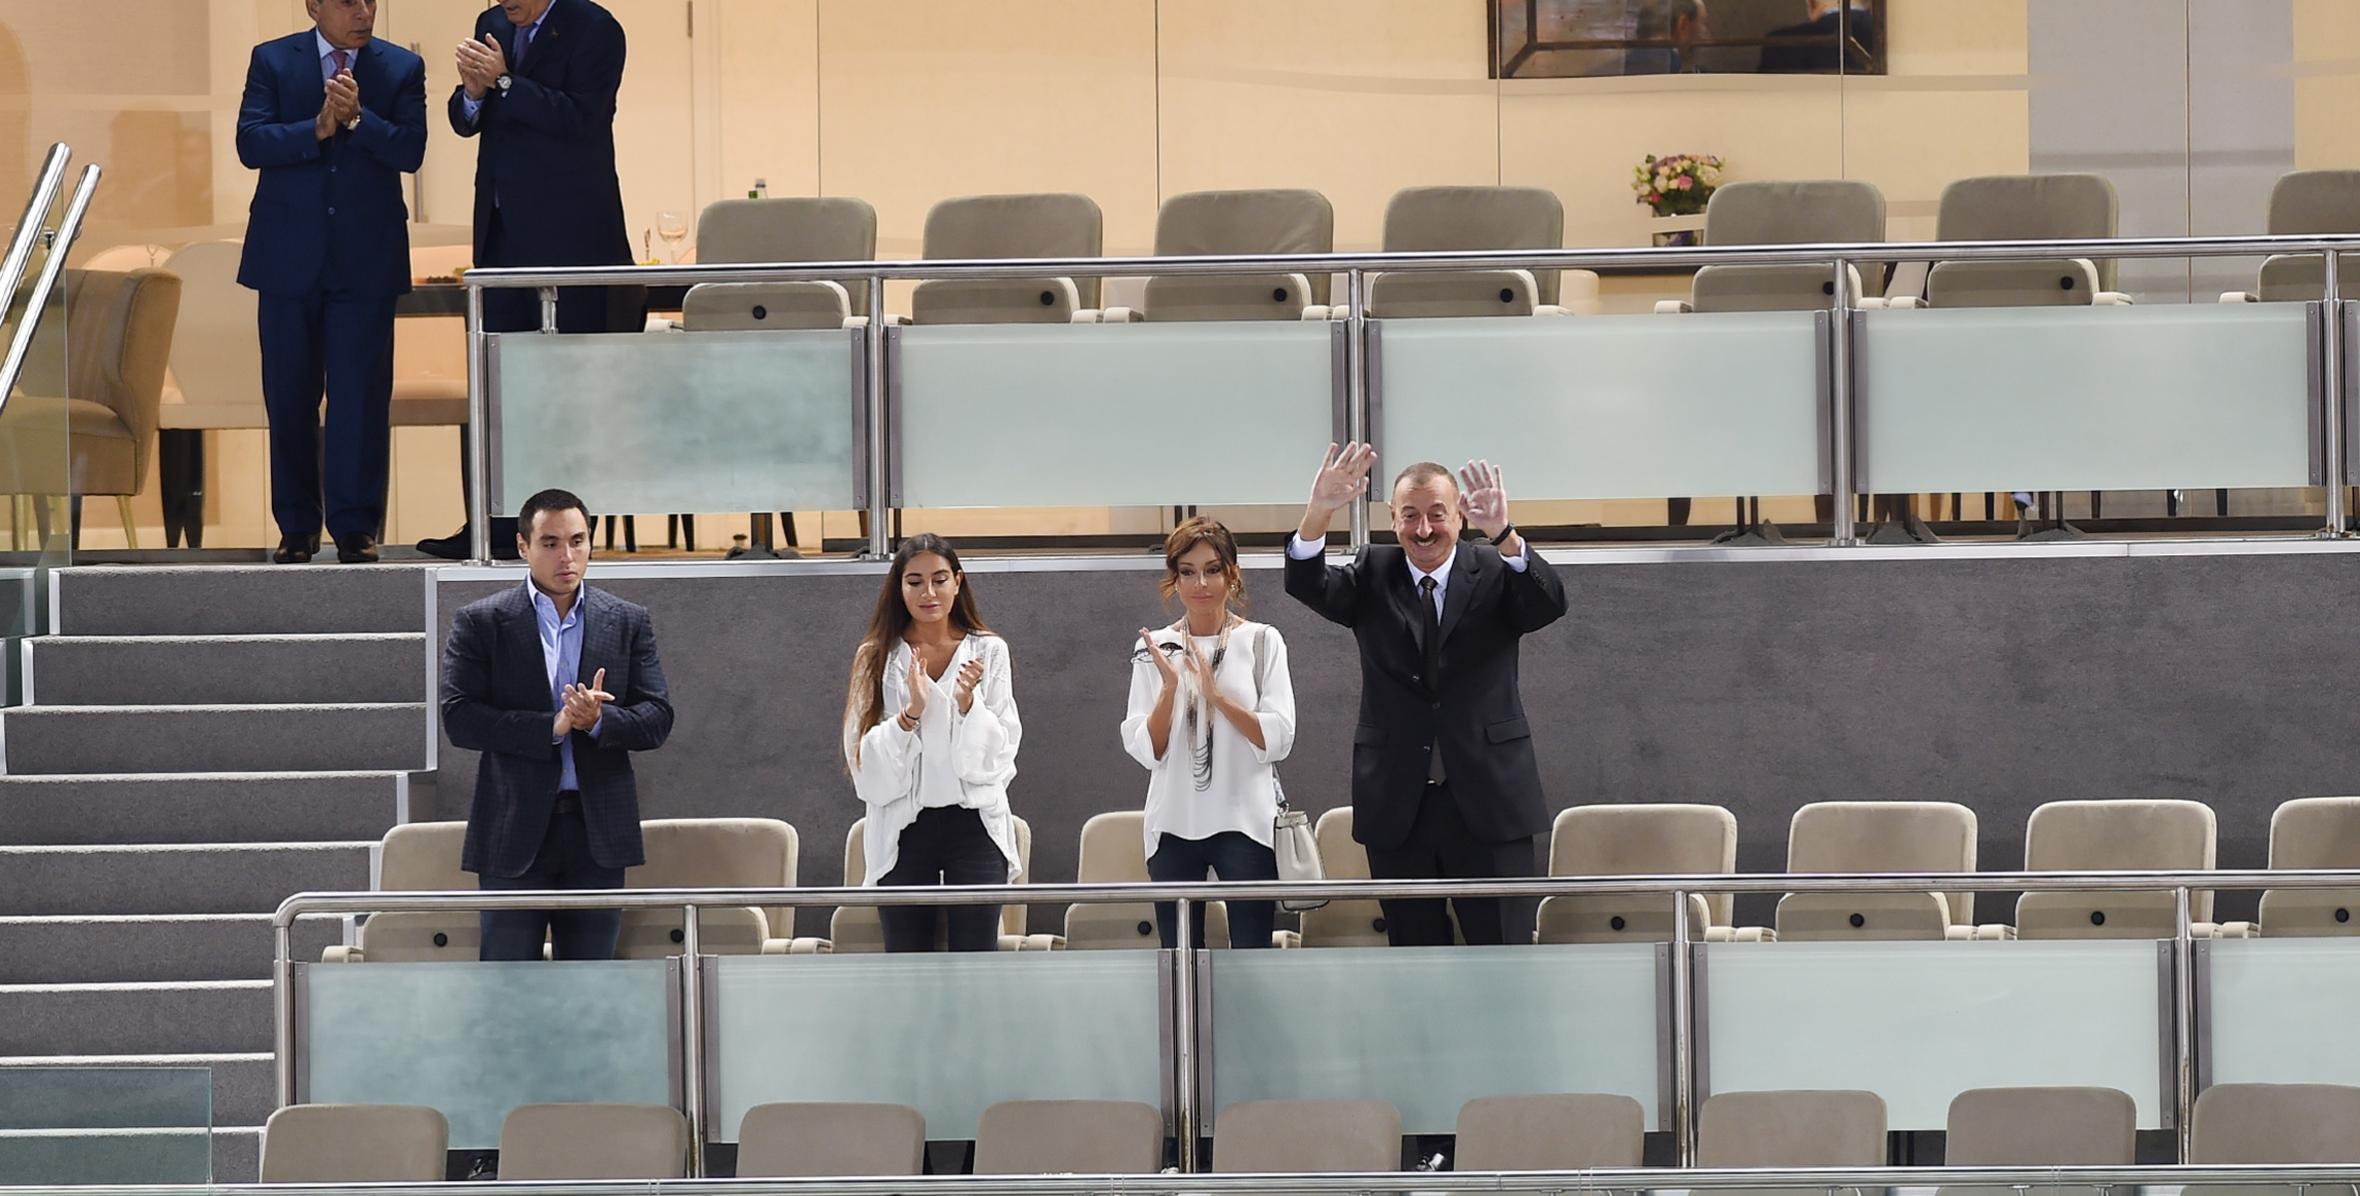 Ilham Aliyev and first lady Mehriban Aliyeva watched the national team`s game